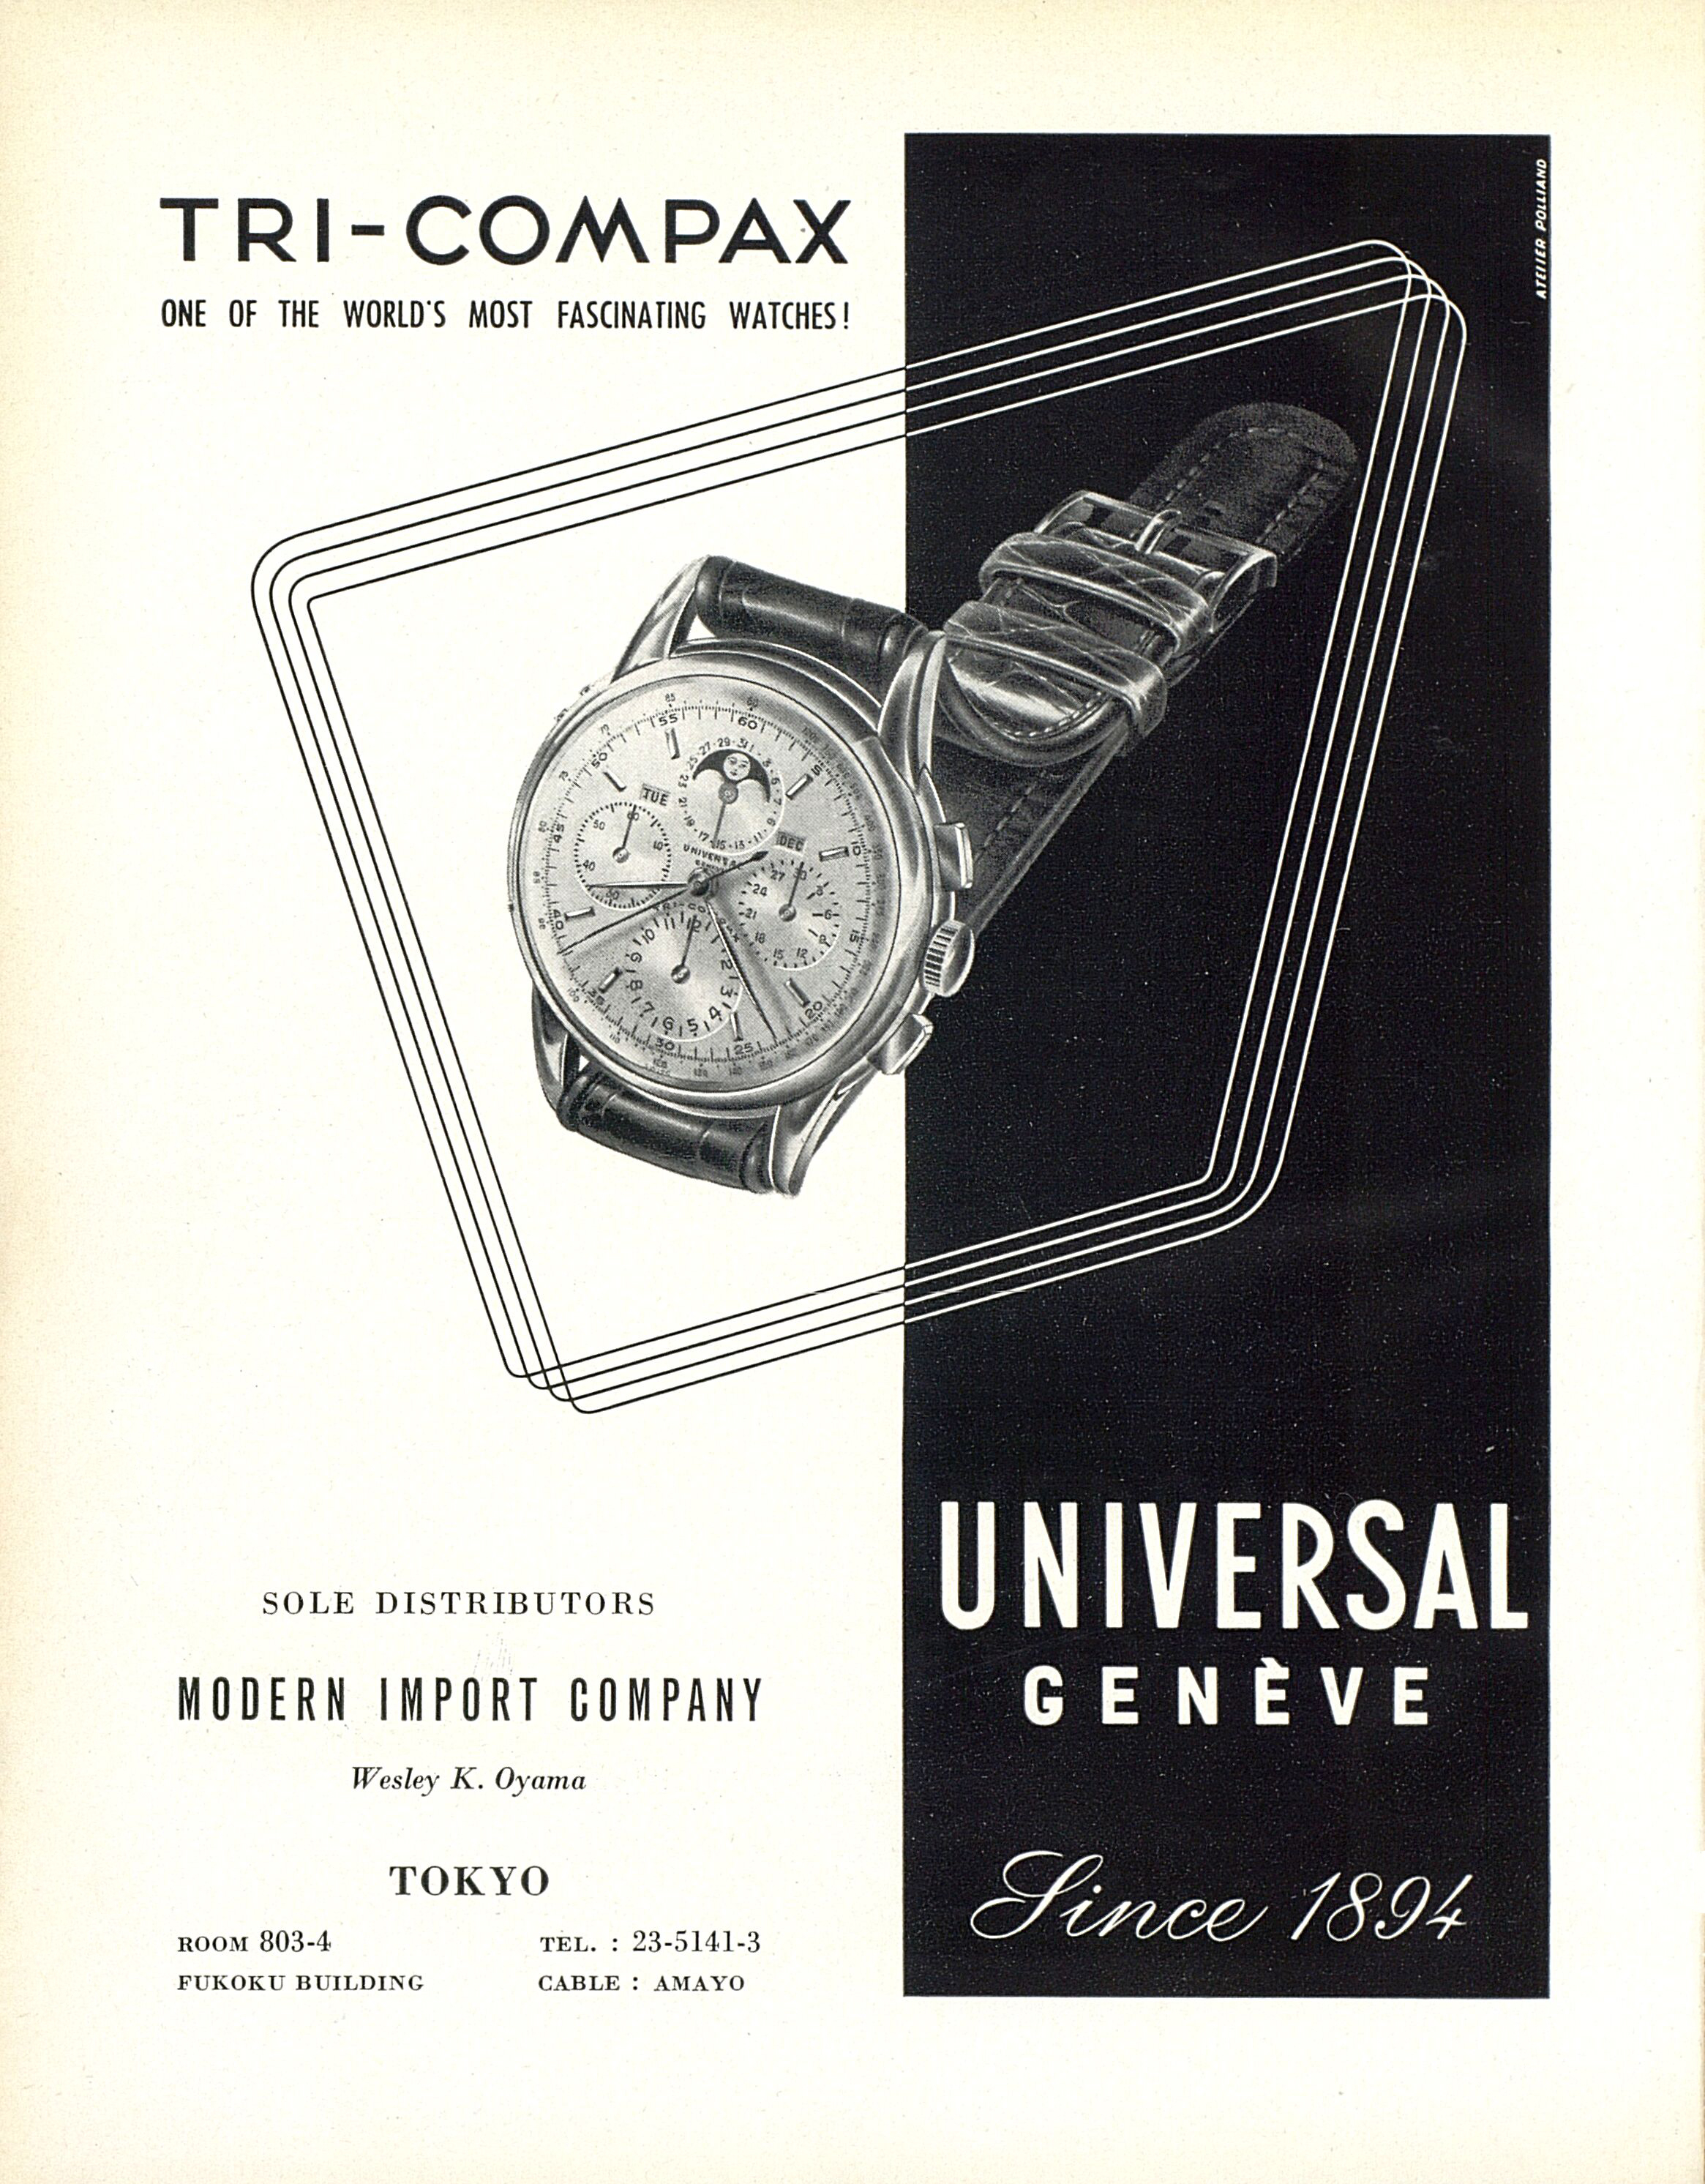 02_Vintage_ad_for_the_Universal_Geneve_Tri-Compax_published_in_Europa_Star_in_1952 Breitling adquiere Universal Genève